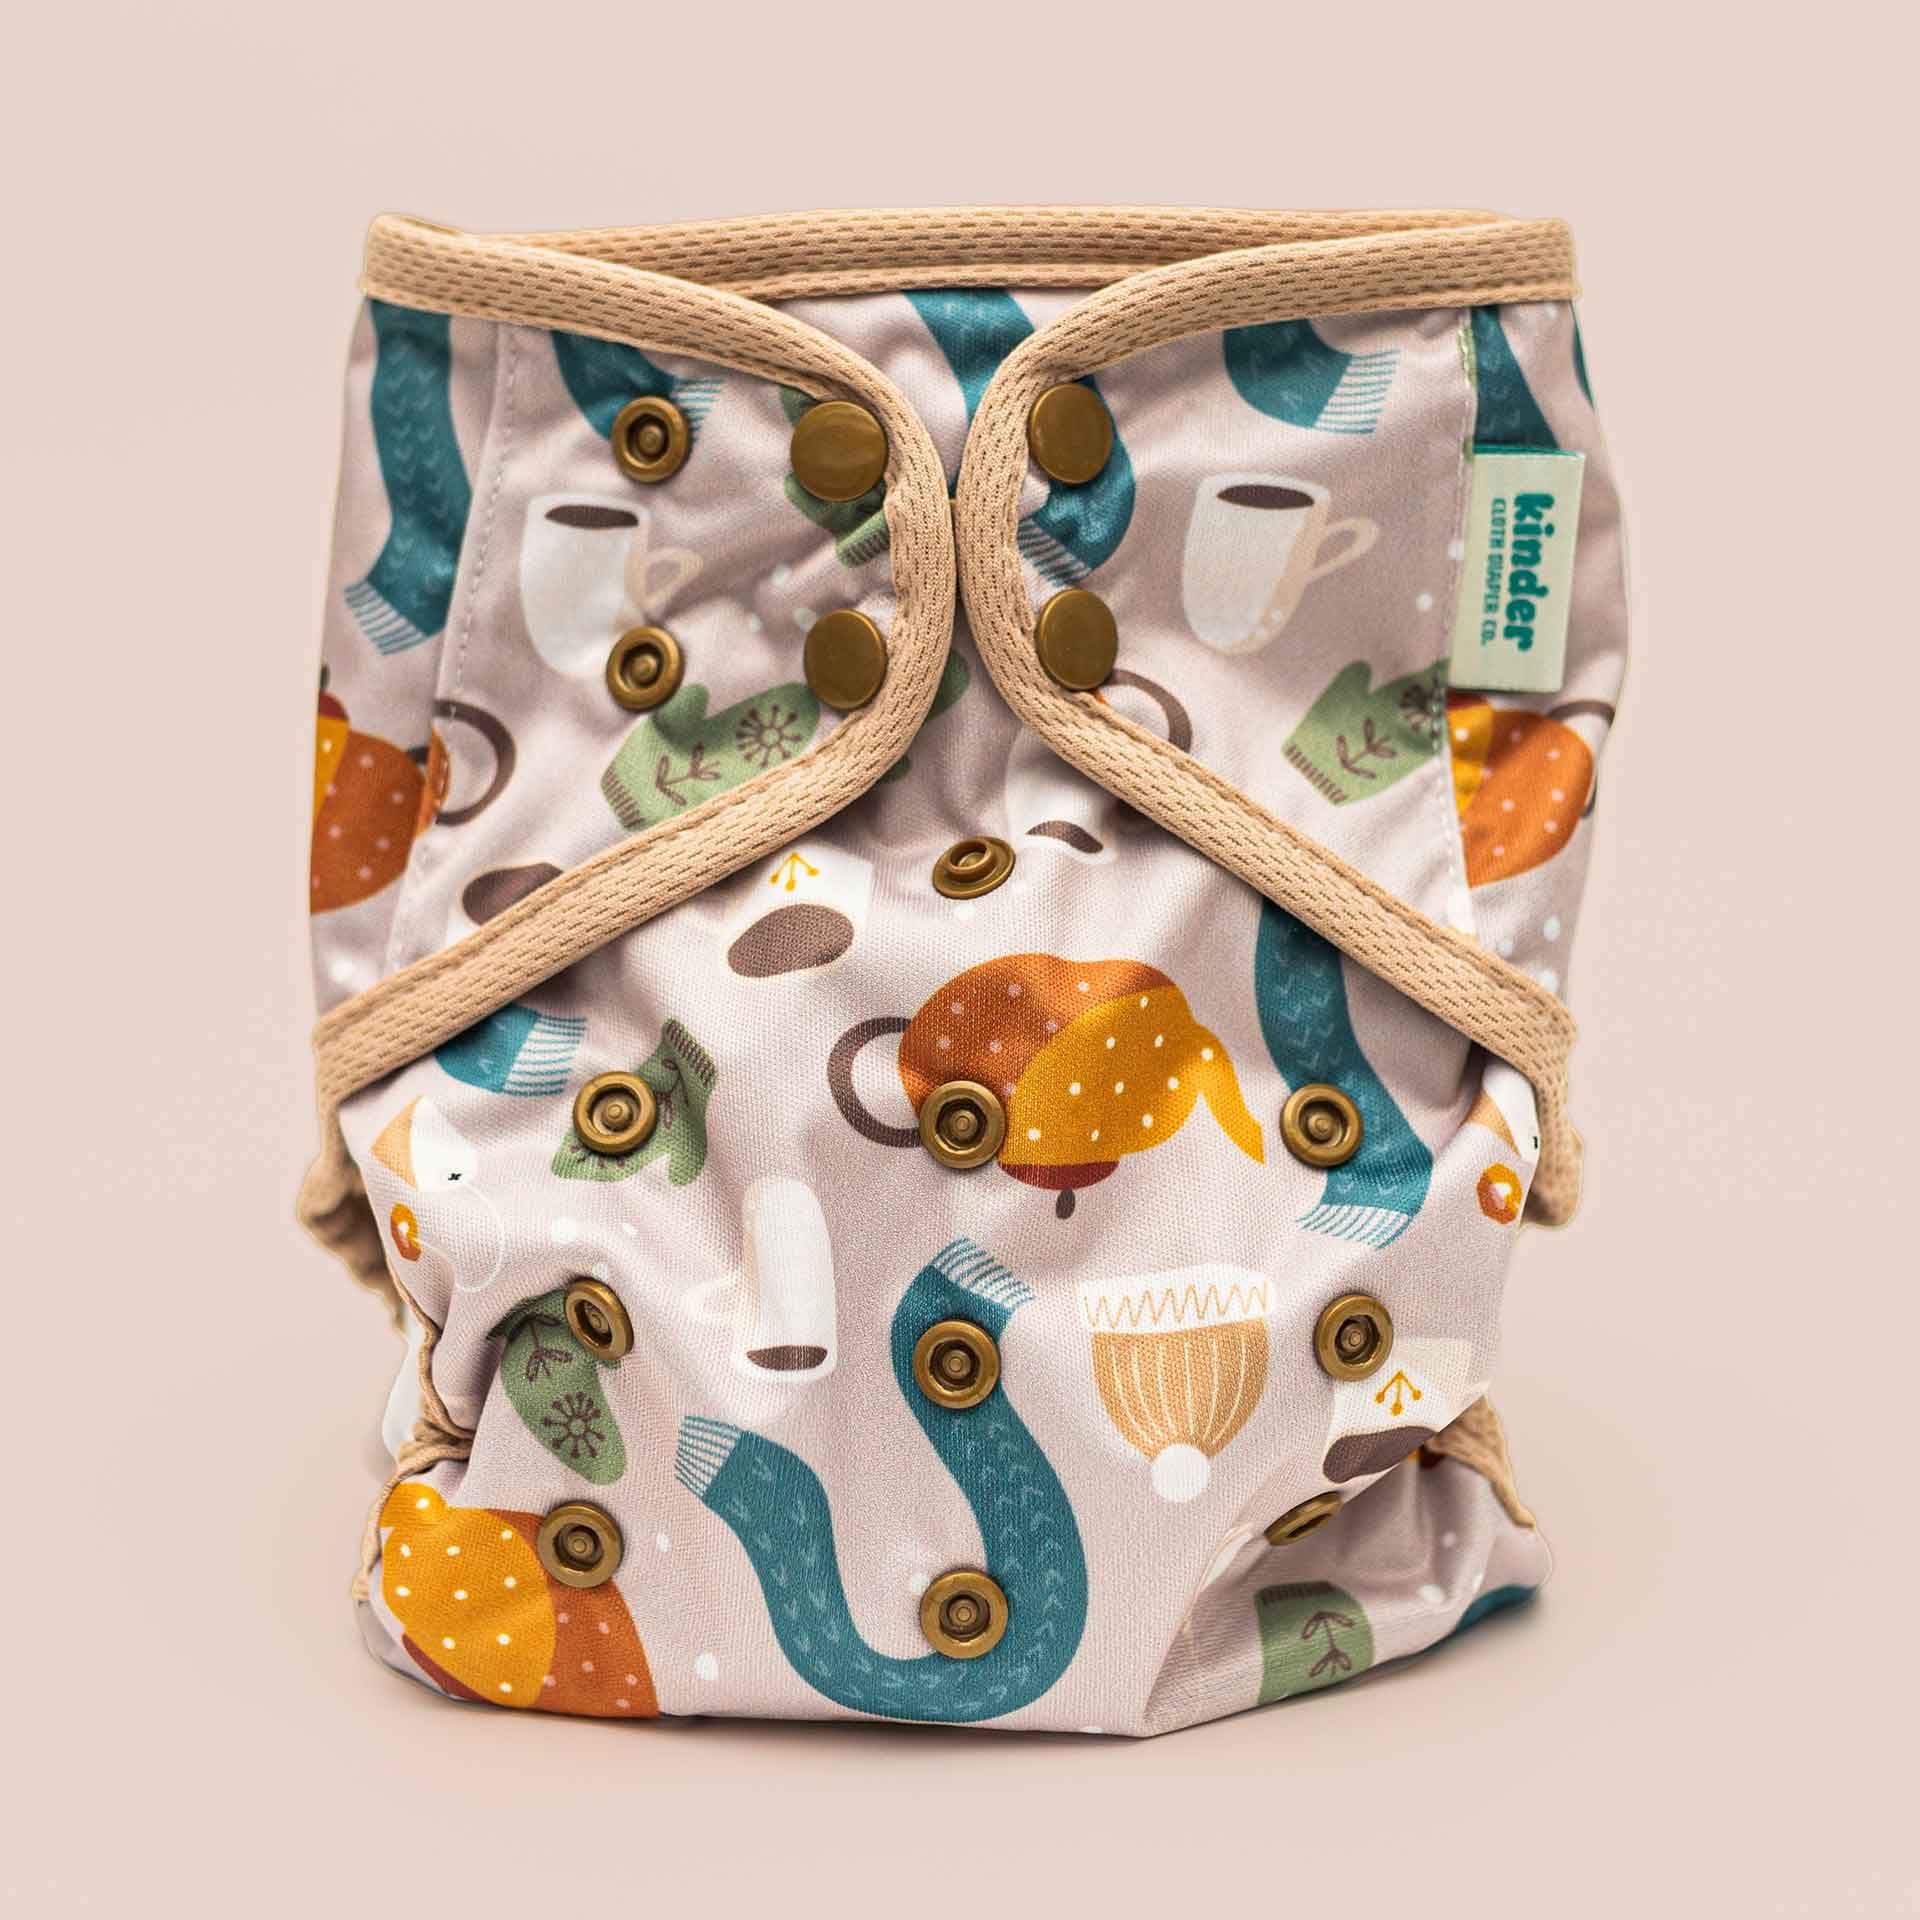 Modern Reusable Cloth Diapers Made to Fit from Birth to Toddlerhood. –  Kinder Cloth Diaper Co.